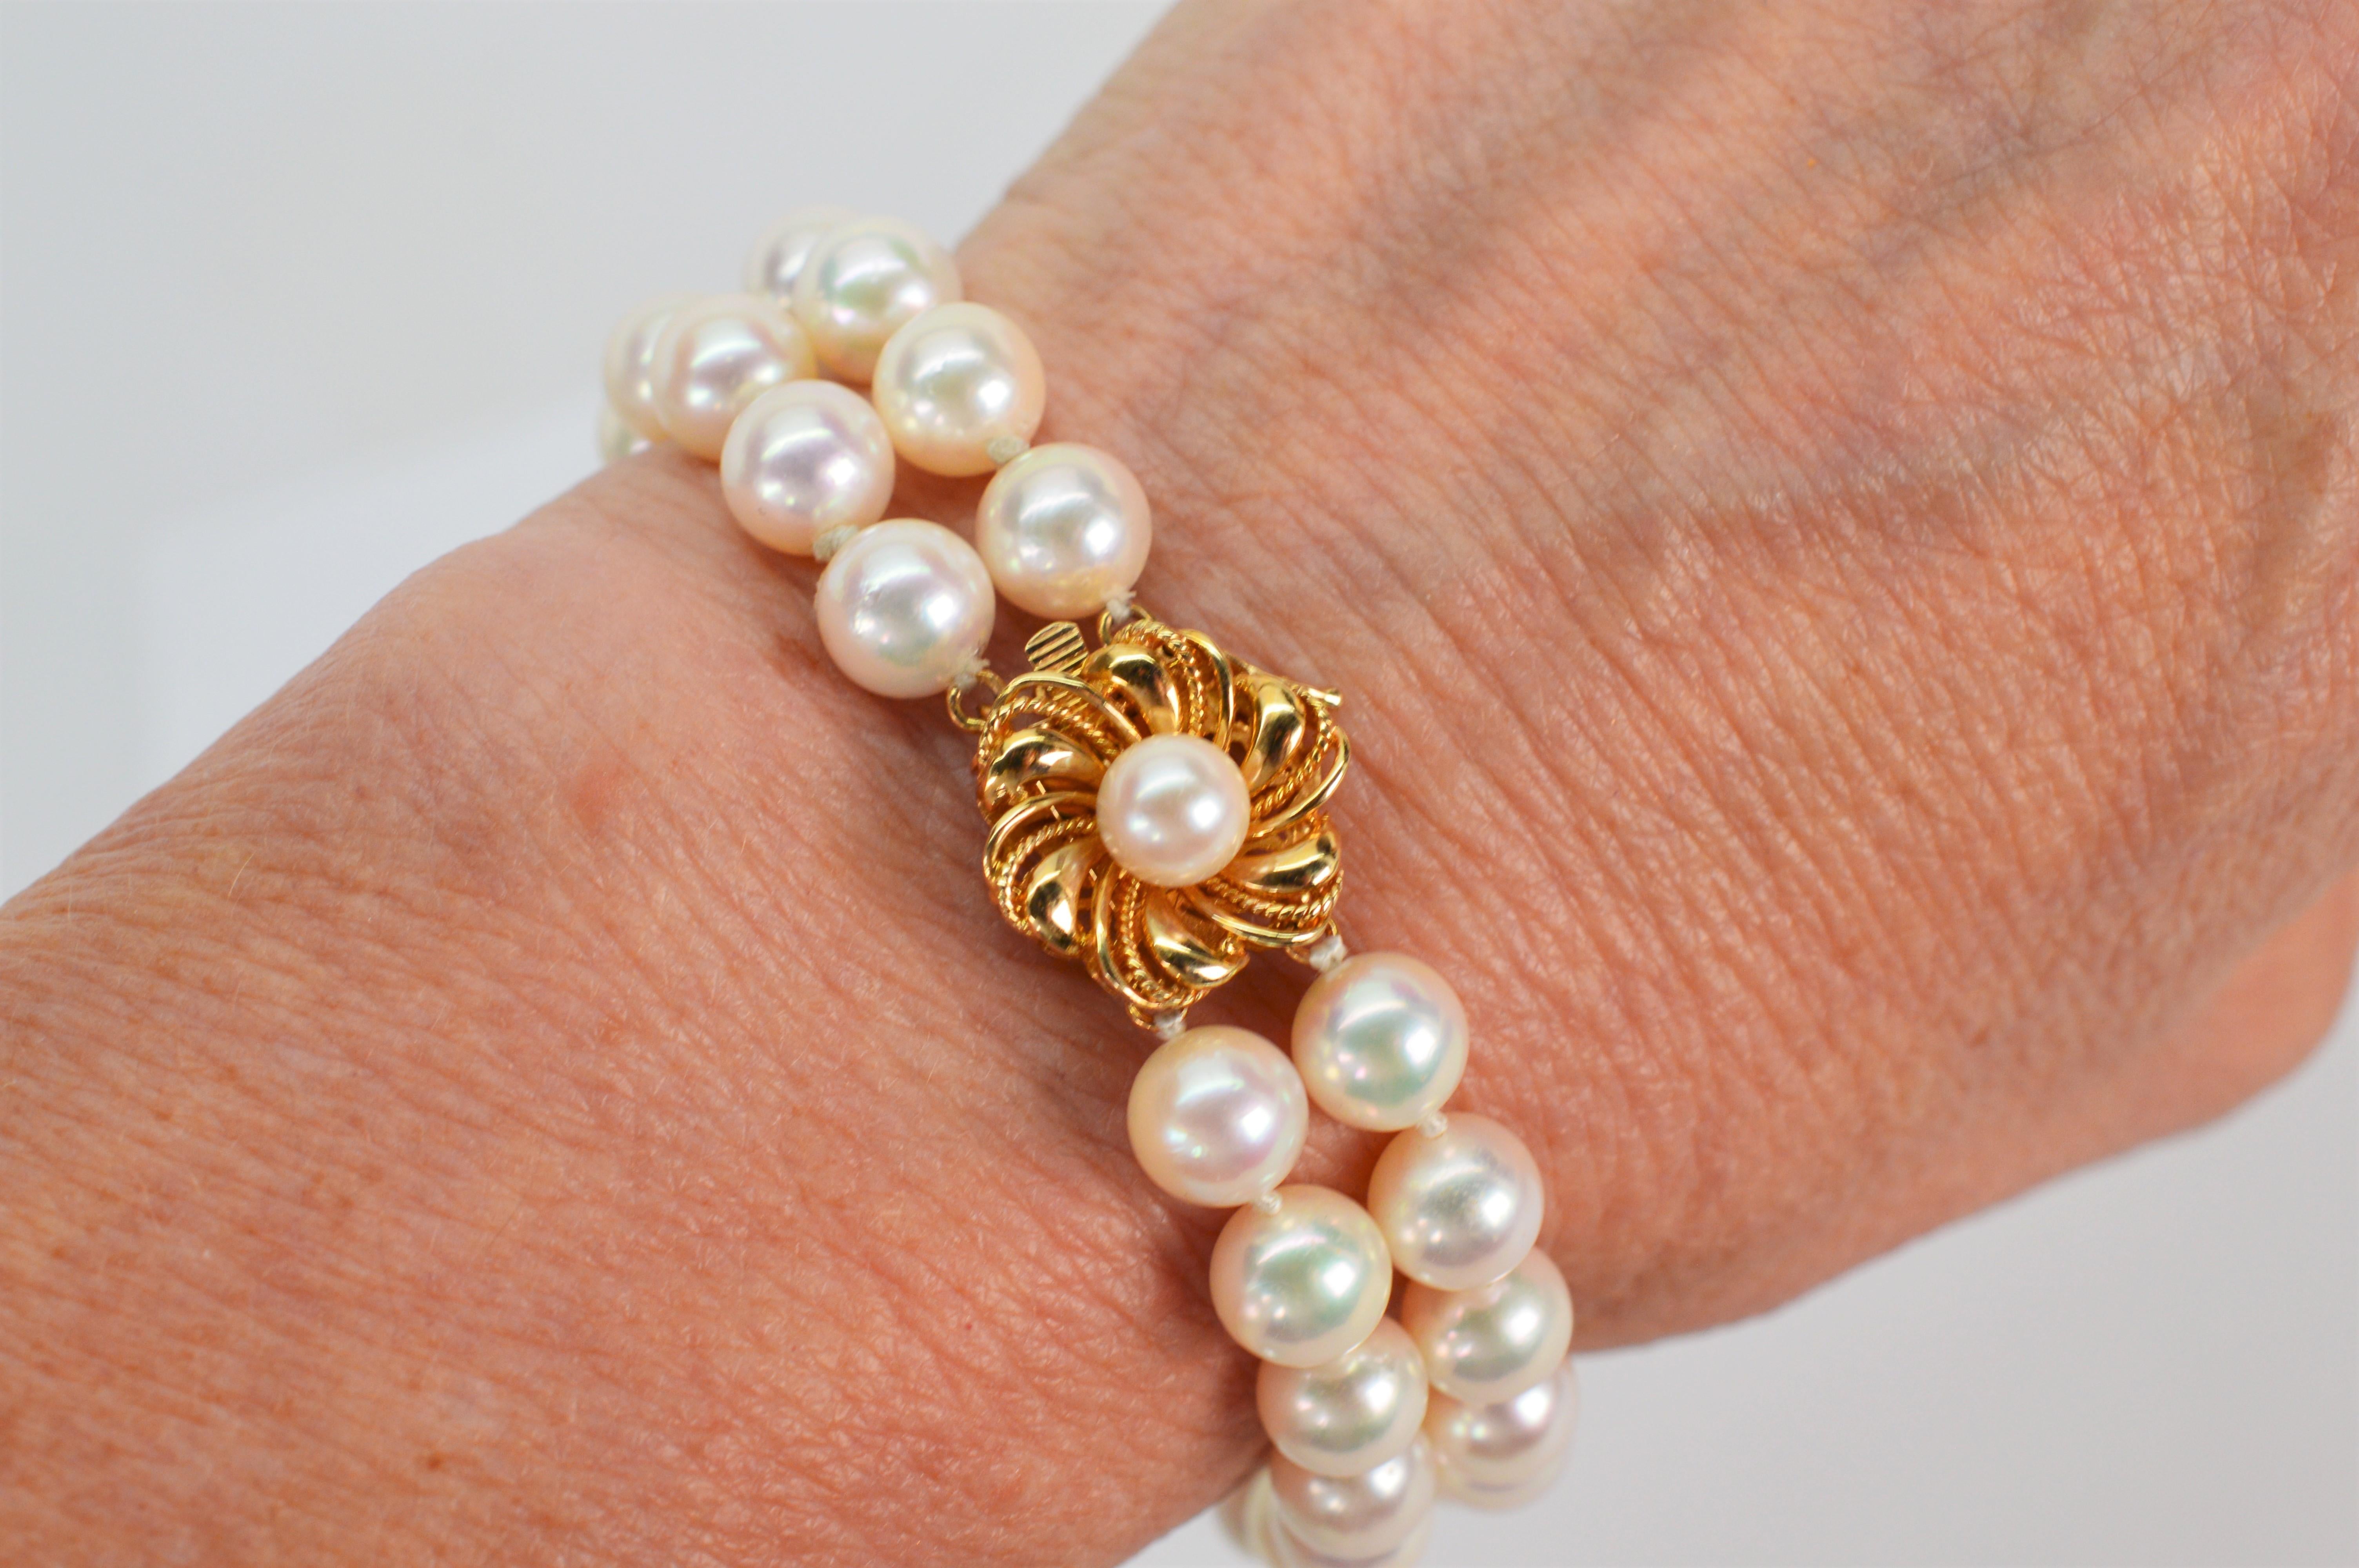 A gorgeous pearl bracelet that transcends classic style.  Featuring an adorable 14 karat yellow gold floral inspired decorative clasp with one lustrous 6mm round AAA Akoya Pearl nested in the gold petals which also functions as a fine box clasp.